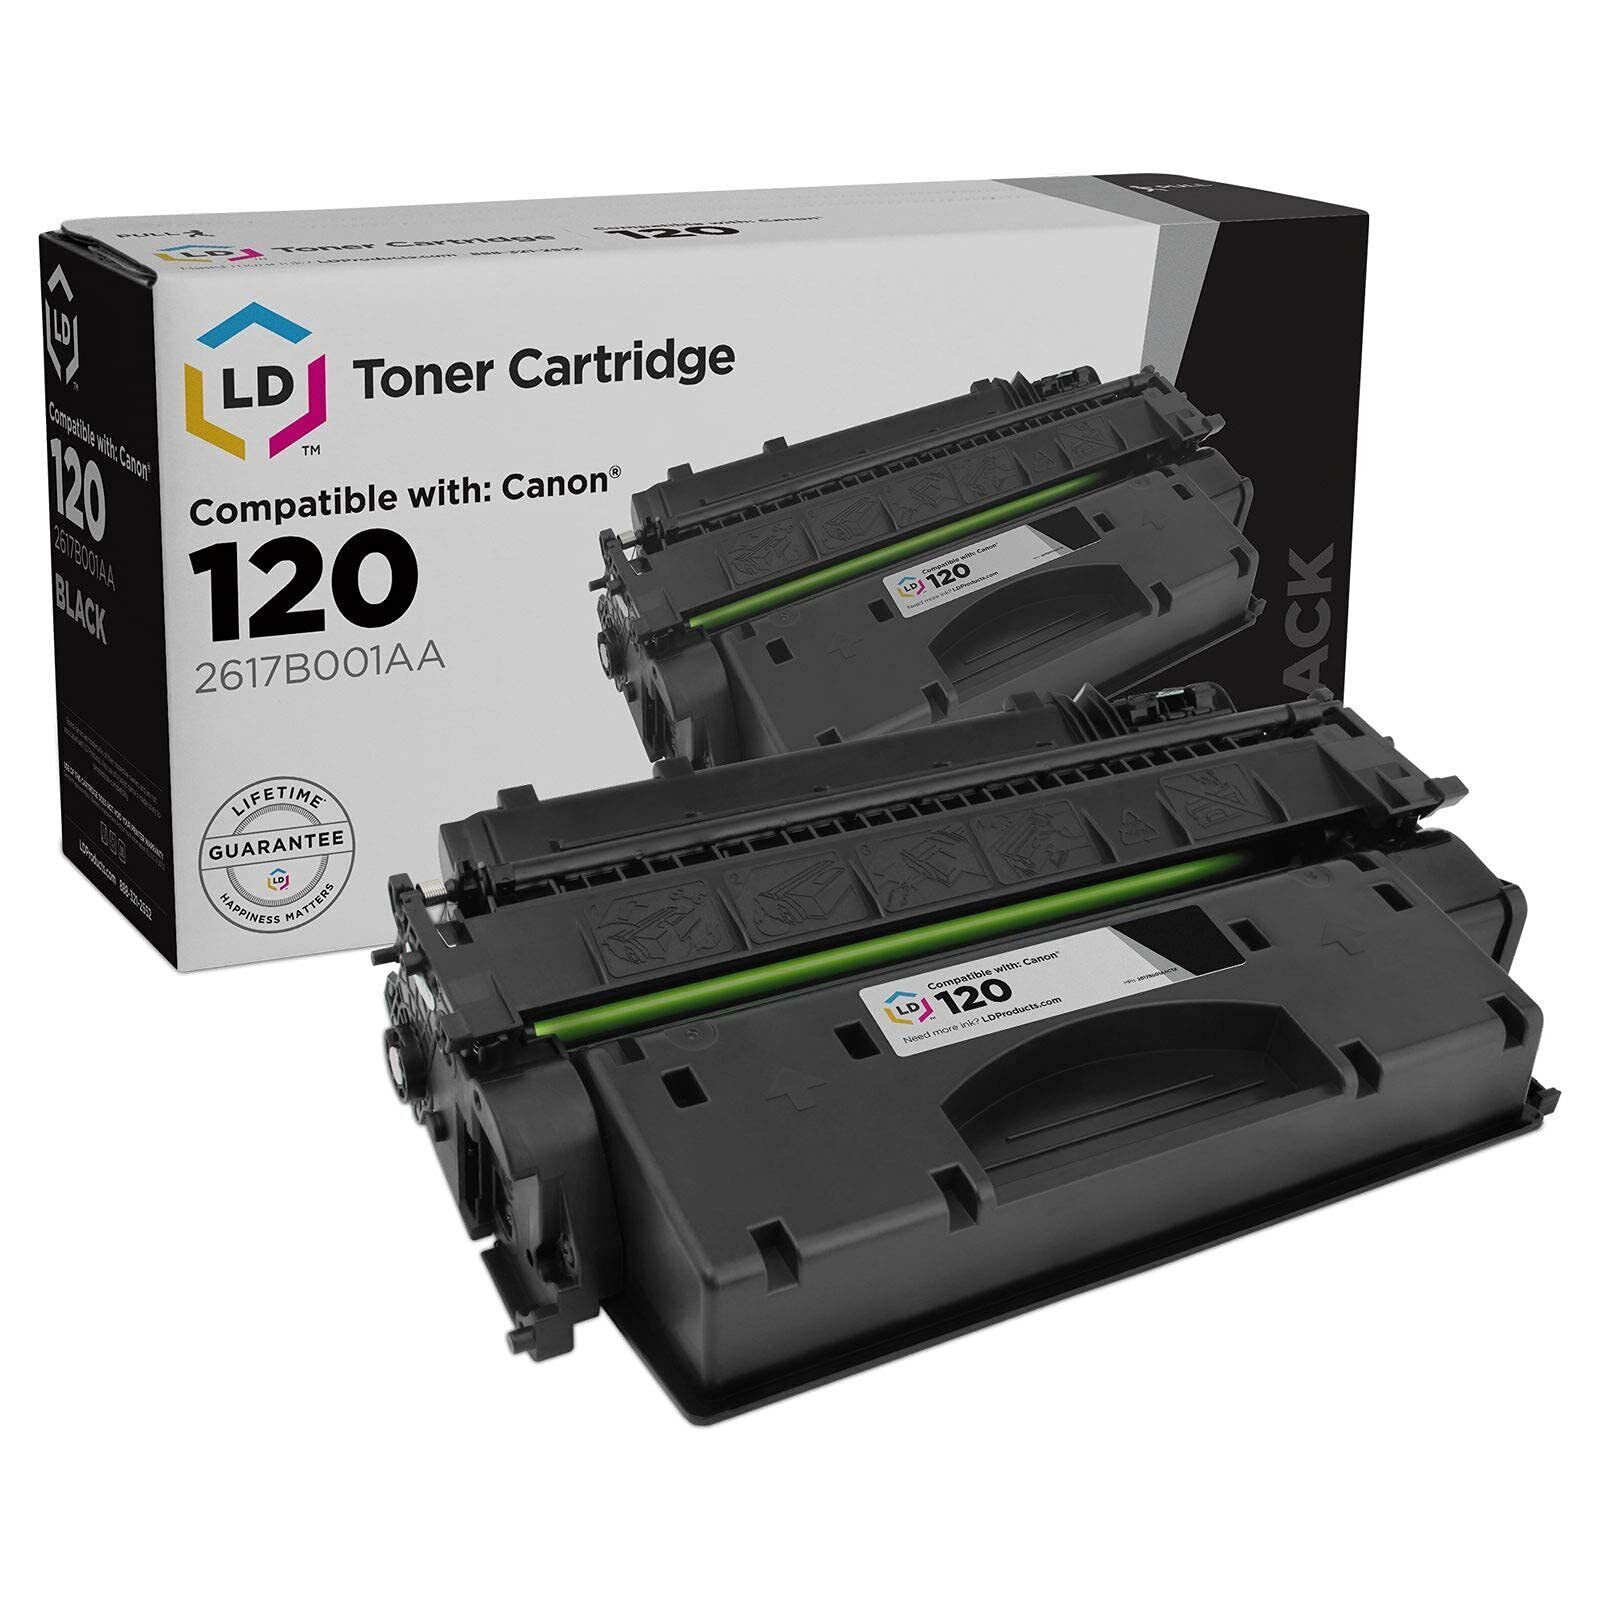 LD Compatible Toner Cartridge Replacement for Canon 120 2617B001AA (Black)